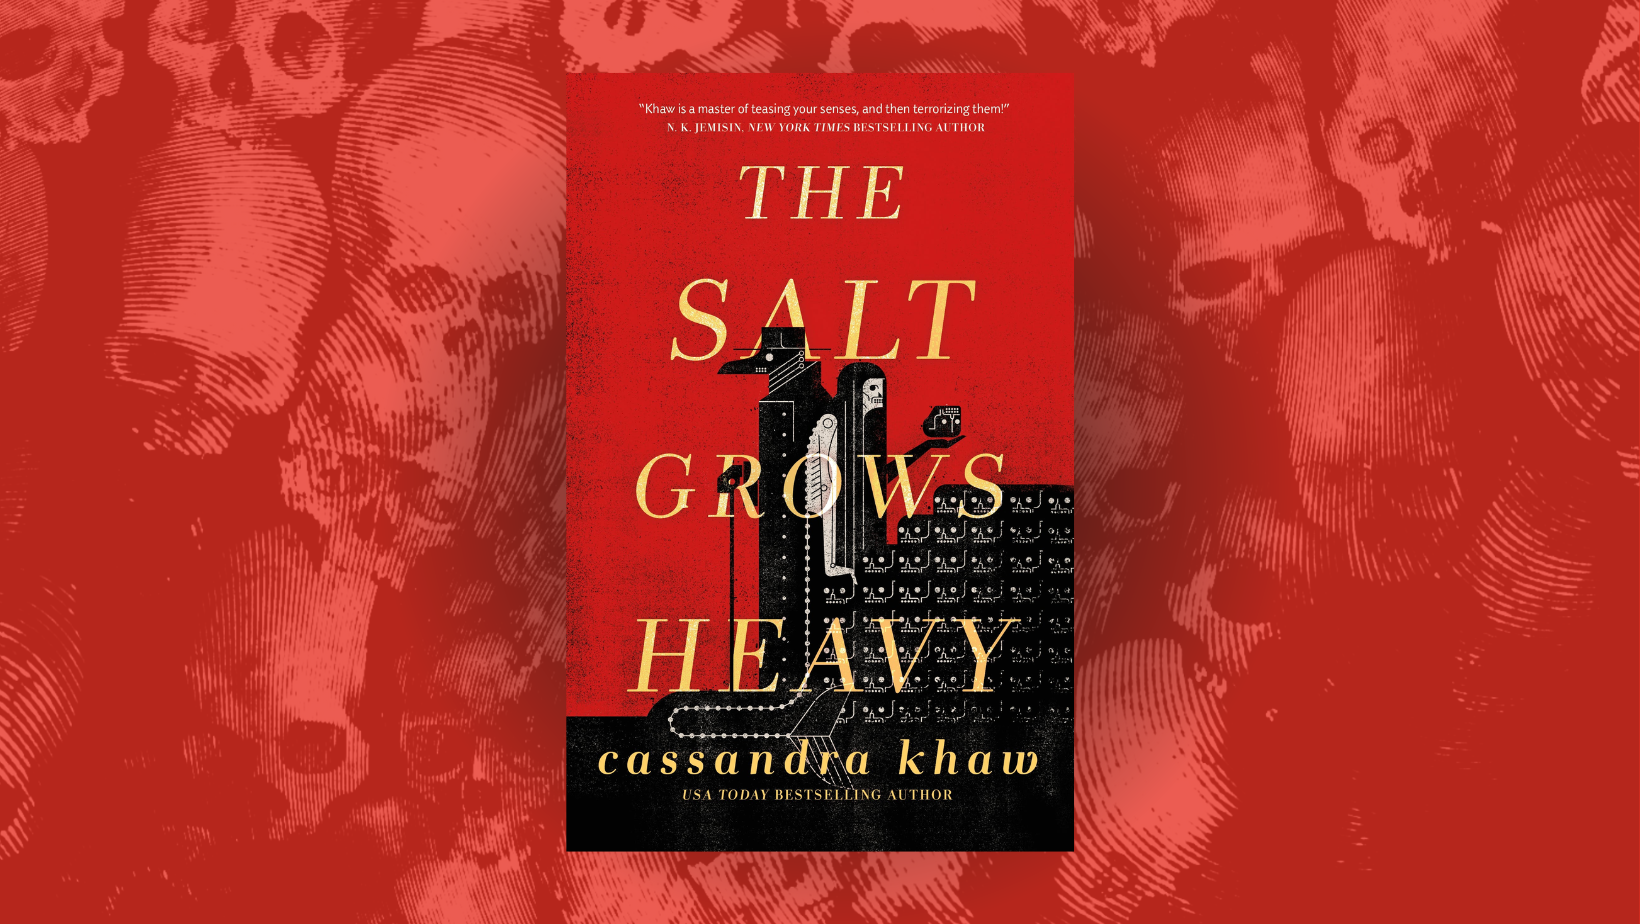 Linocut skulls on a red background with the cover of The Salt Grows Heavy by Cassandra Khaw